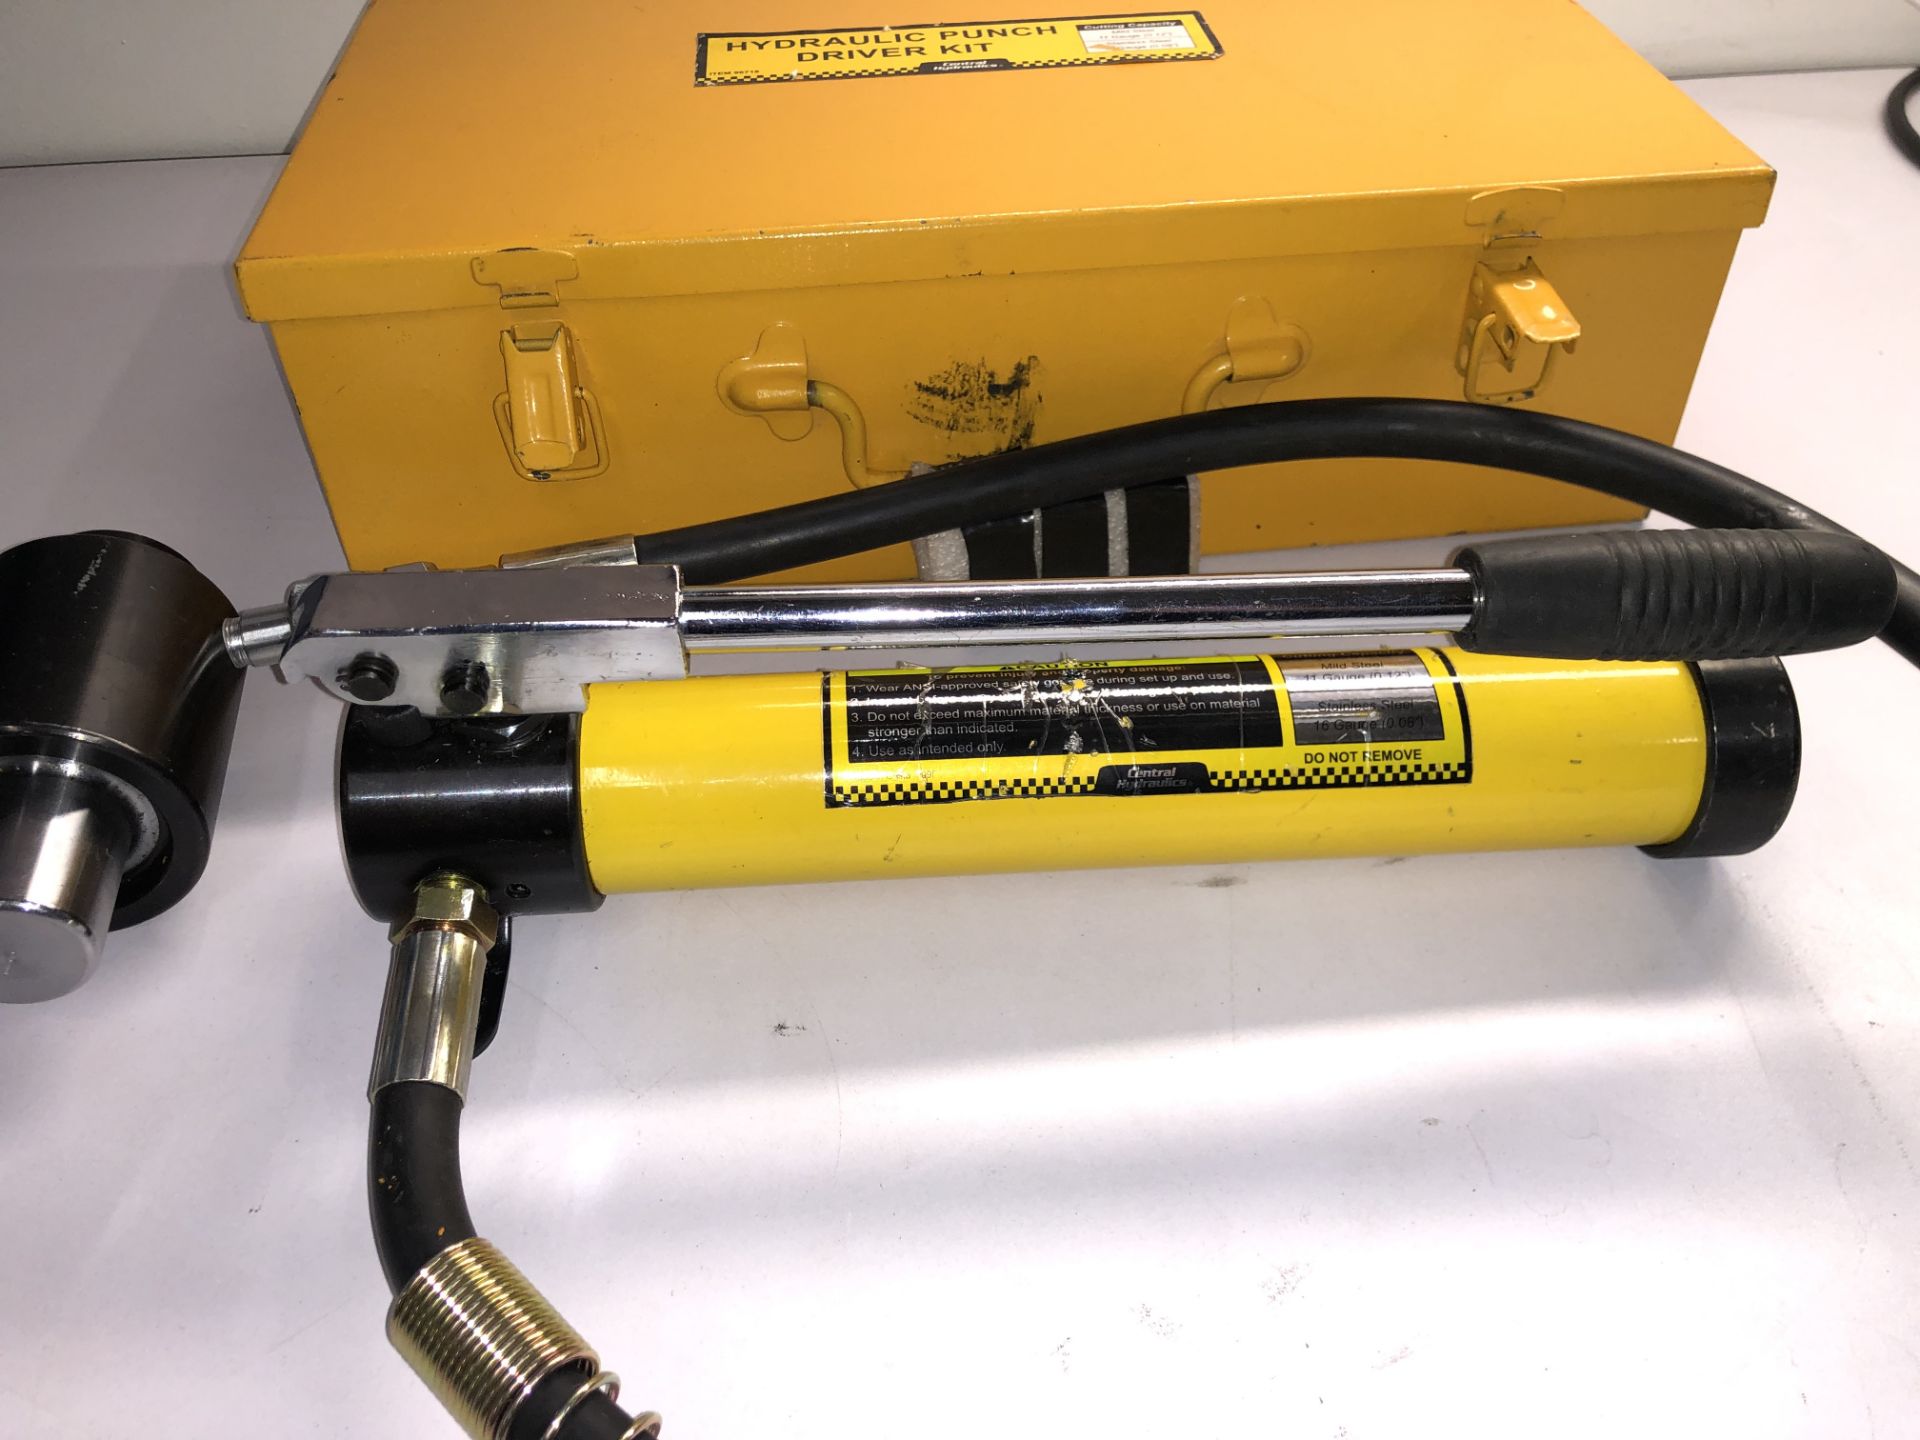 CENTRAL HYDRAULICS HYDRAULIC PUNCH DRIVER KIT ( CUTTING CAPACITY MILD STEEL 11 GAUGE ( 0.12"") - Image 4 of 11